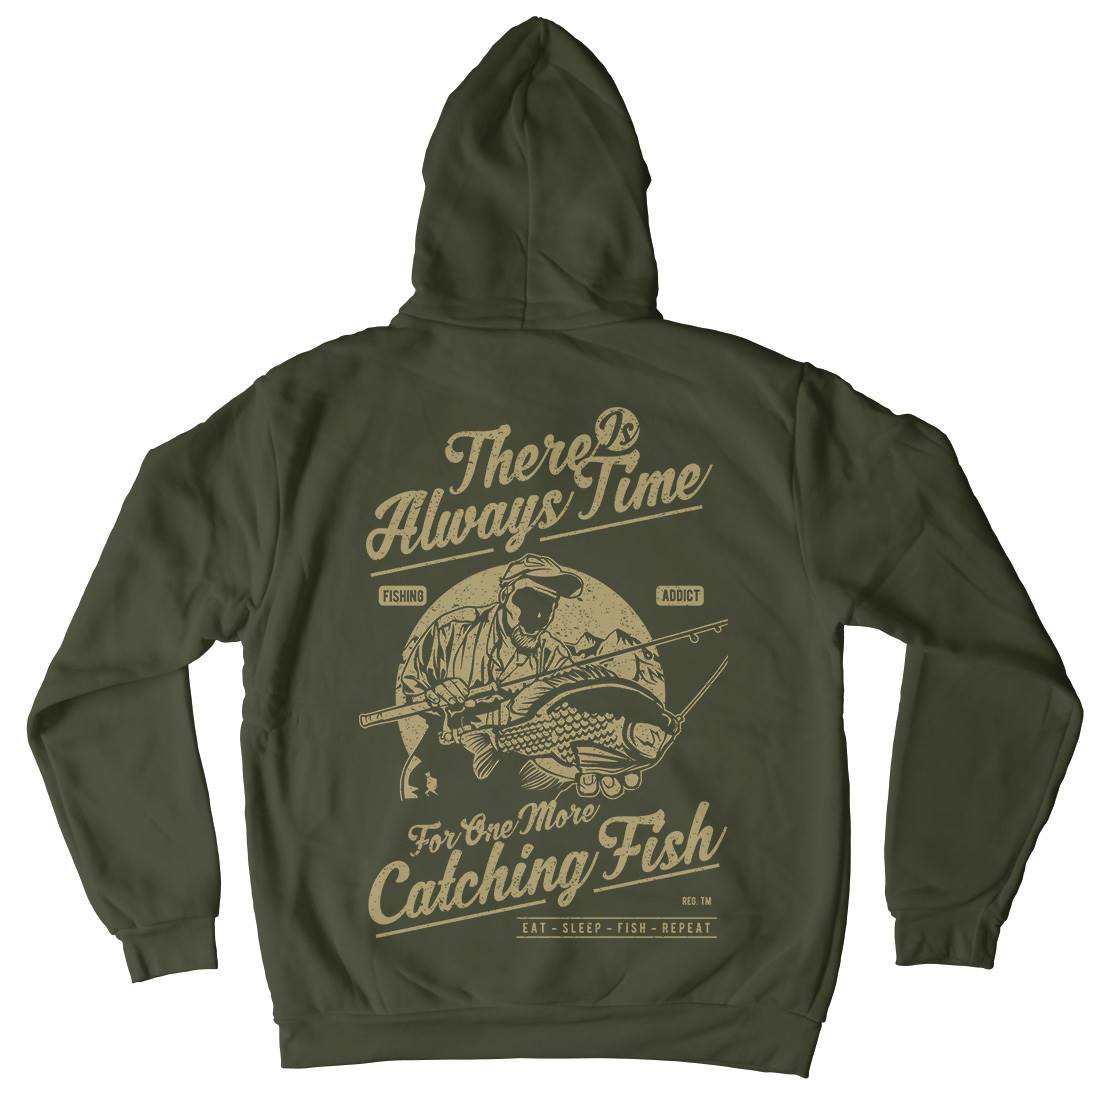 One More Catching Kids Crew Neck Hoodie Fishing A731